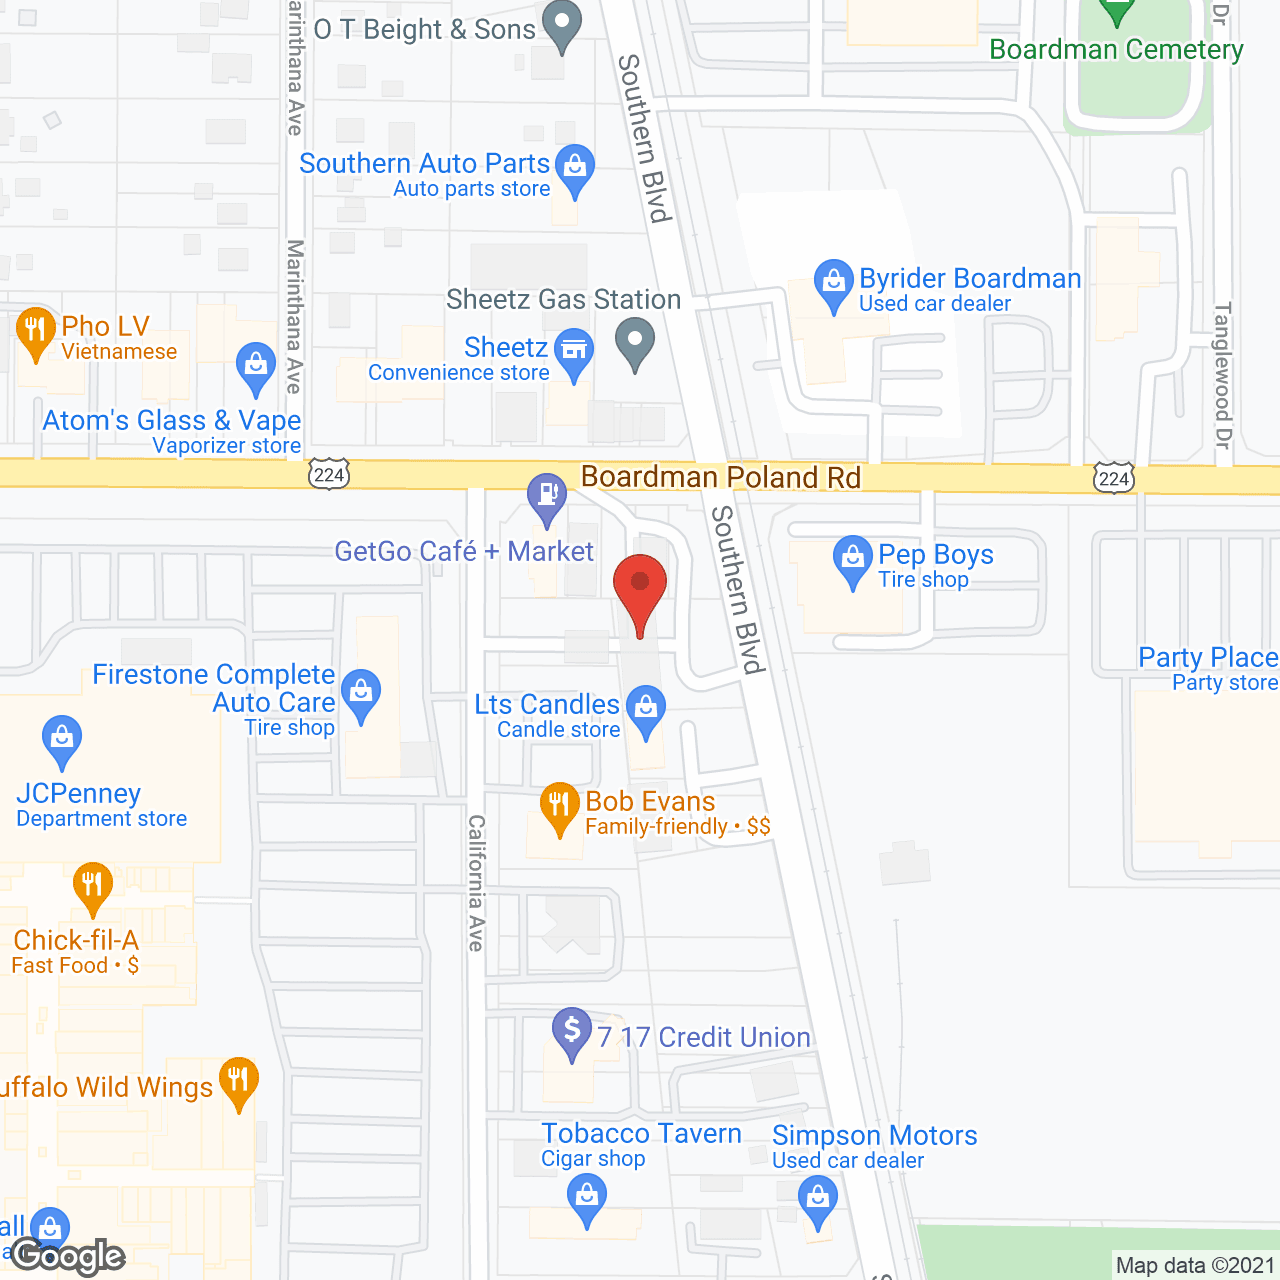 Legacy Visiting Health Services in google map